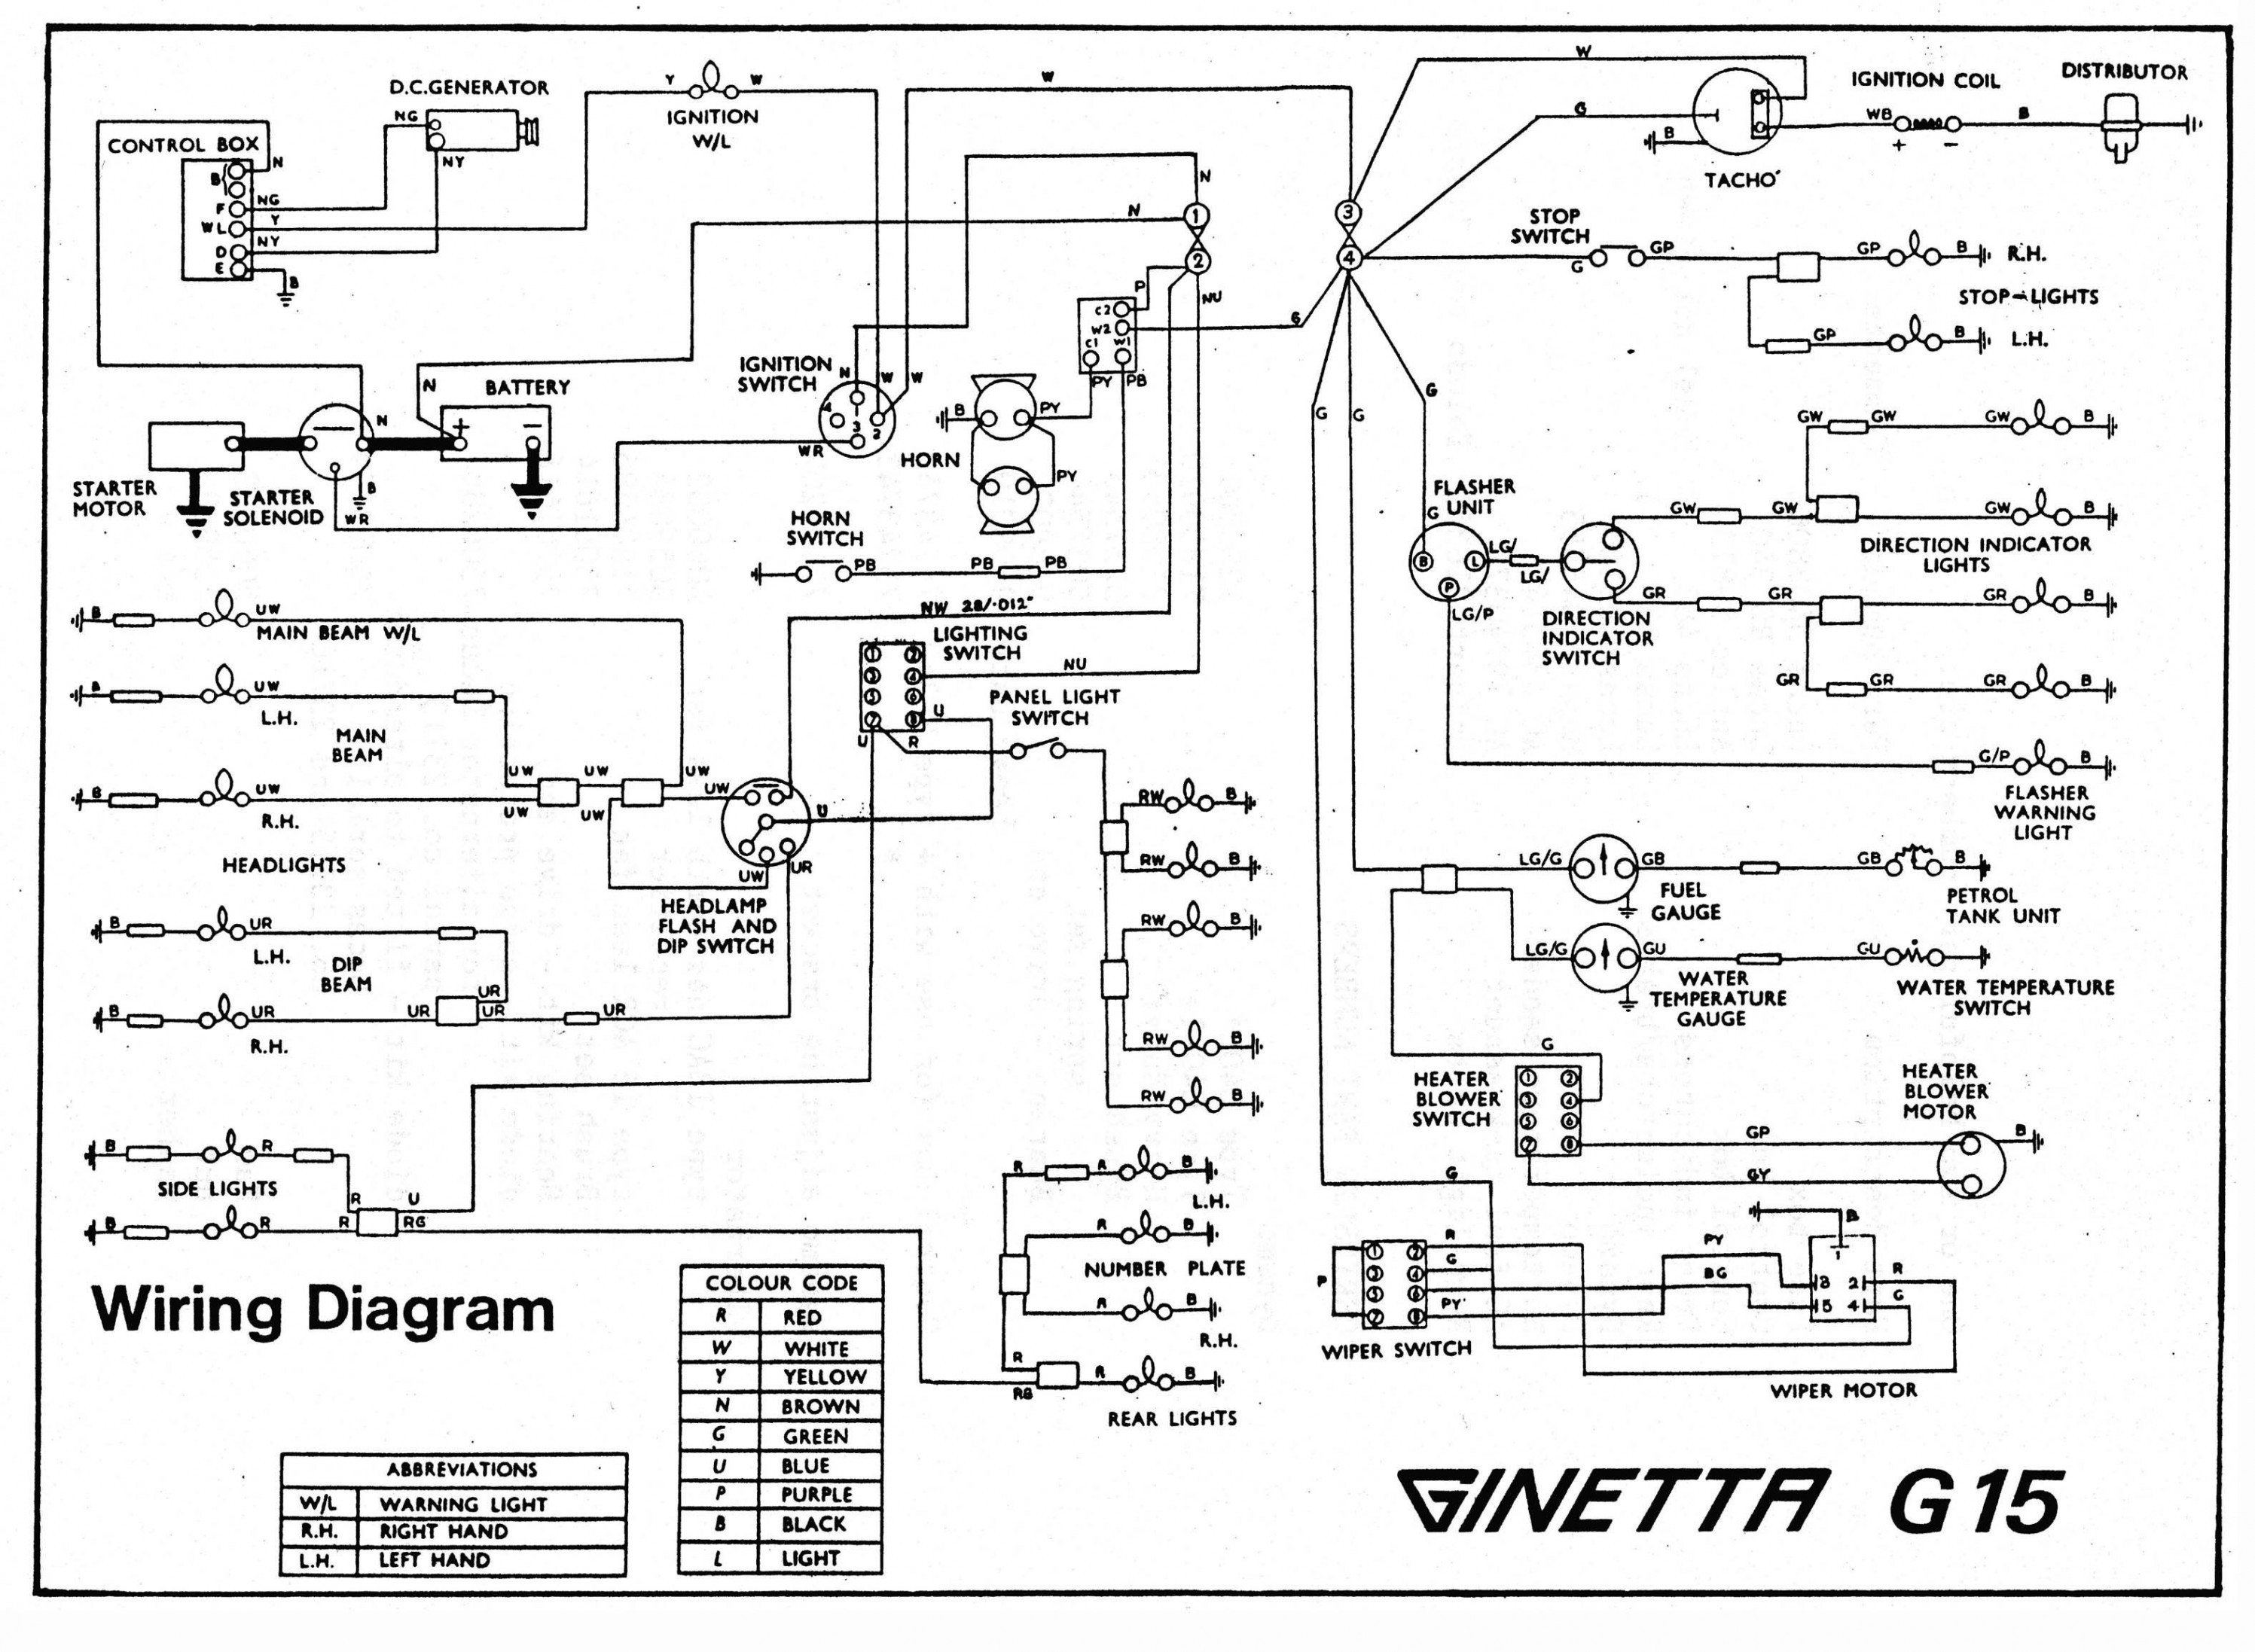 3 5 mm jack wiring diagram 3 5 mm to rca wiring diagram lovely of 3 5 mm jack wiring diagram 2